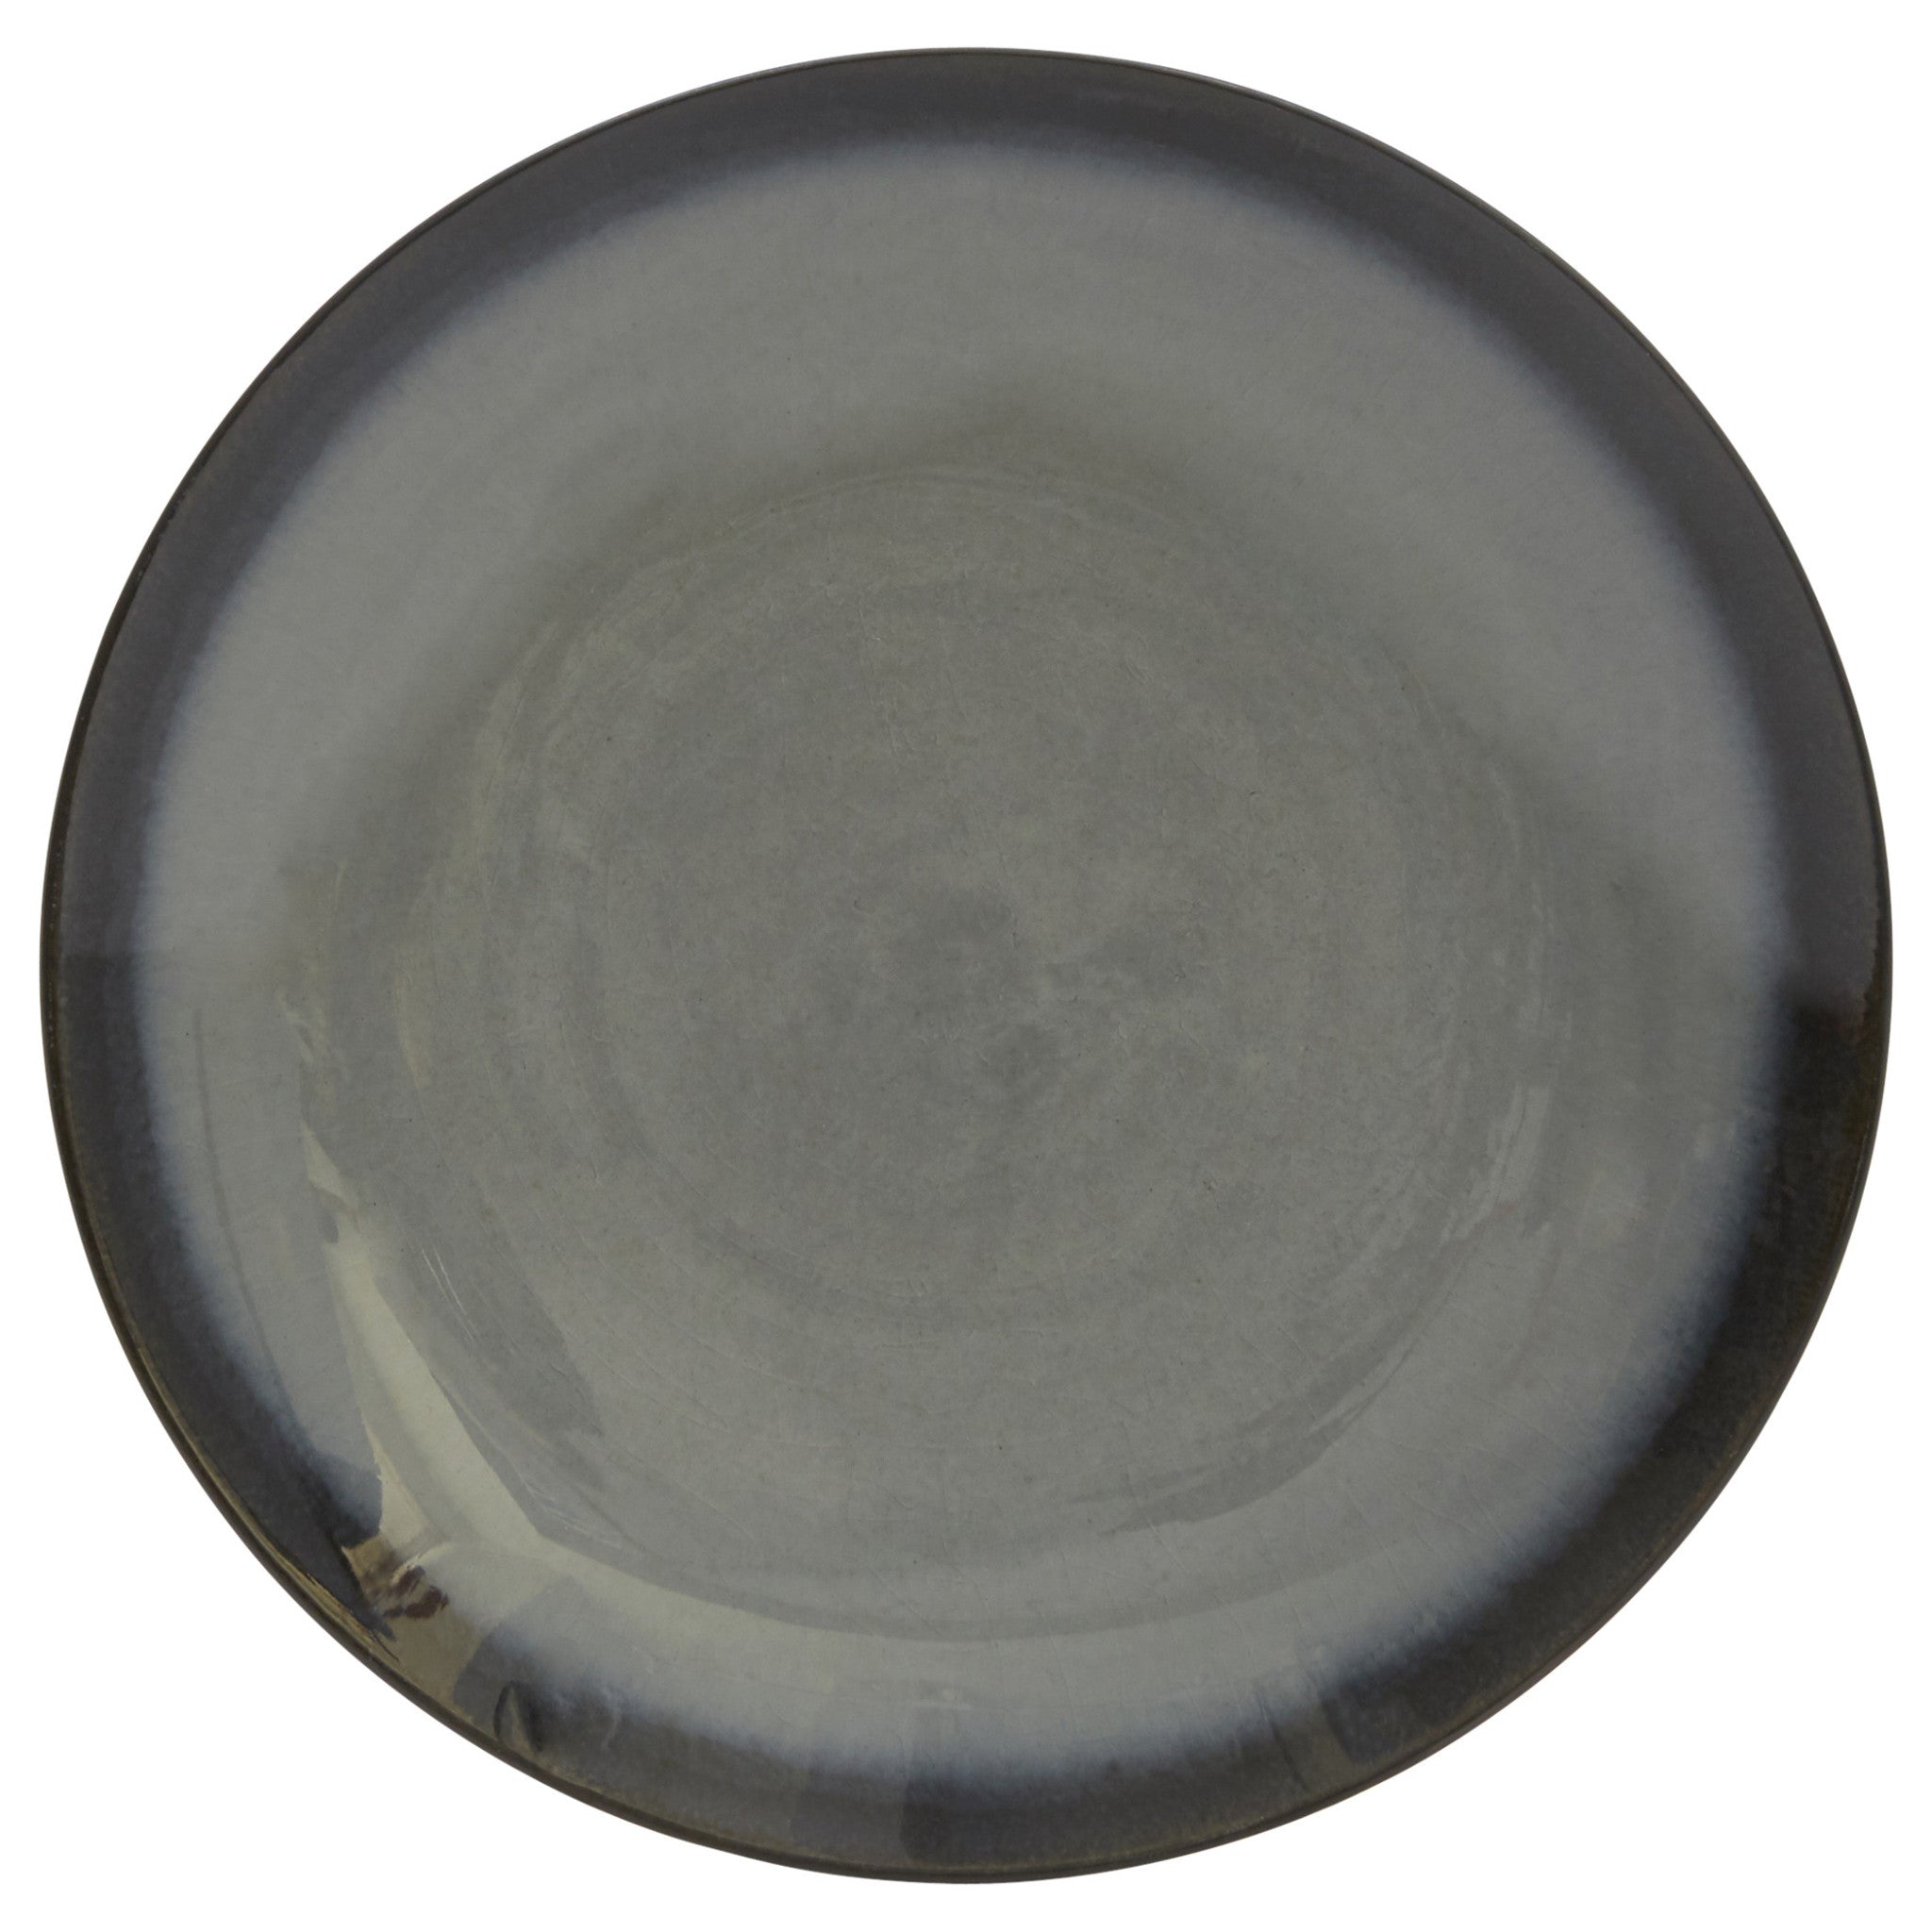 Green and Black Sixteen Piece Round Tone on Tone Ceramic Service For Four Dinnerware Set - Tuesday Morning-Dinnerware